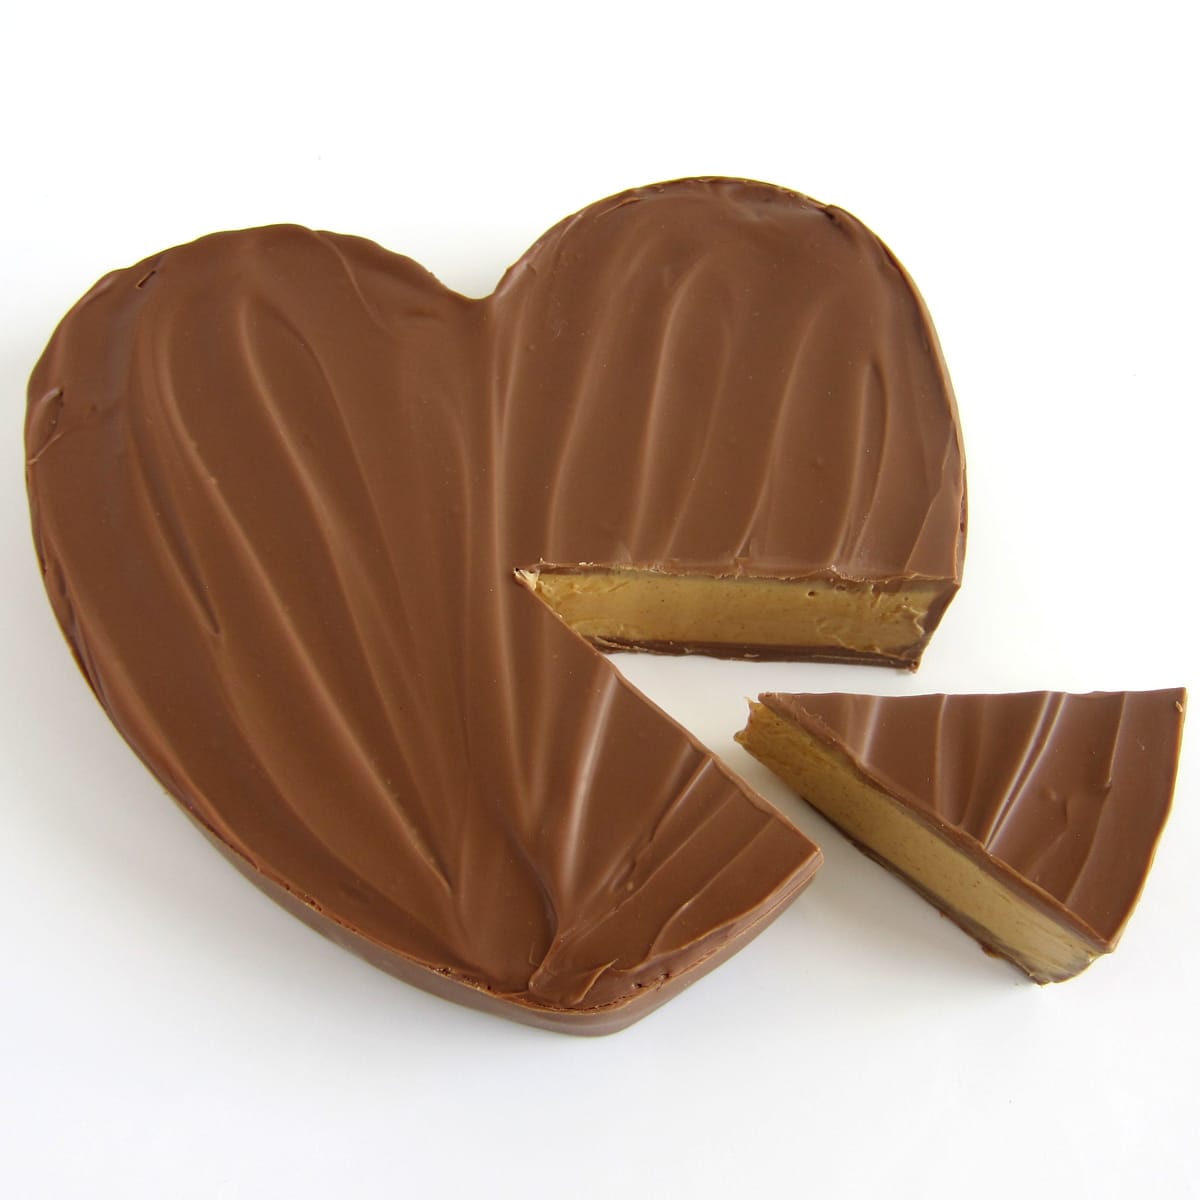 Copycate giant Reese's Cup Heart - chocolate peanut butter cup heart